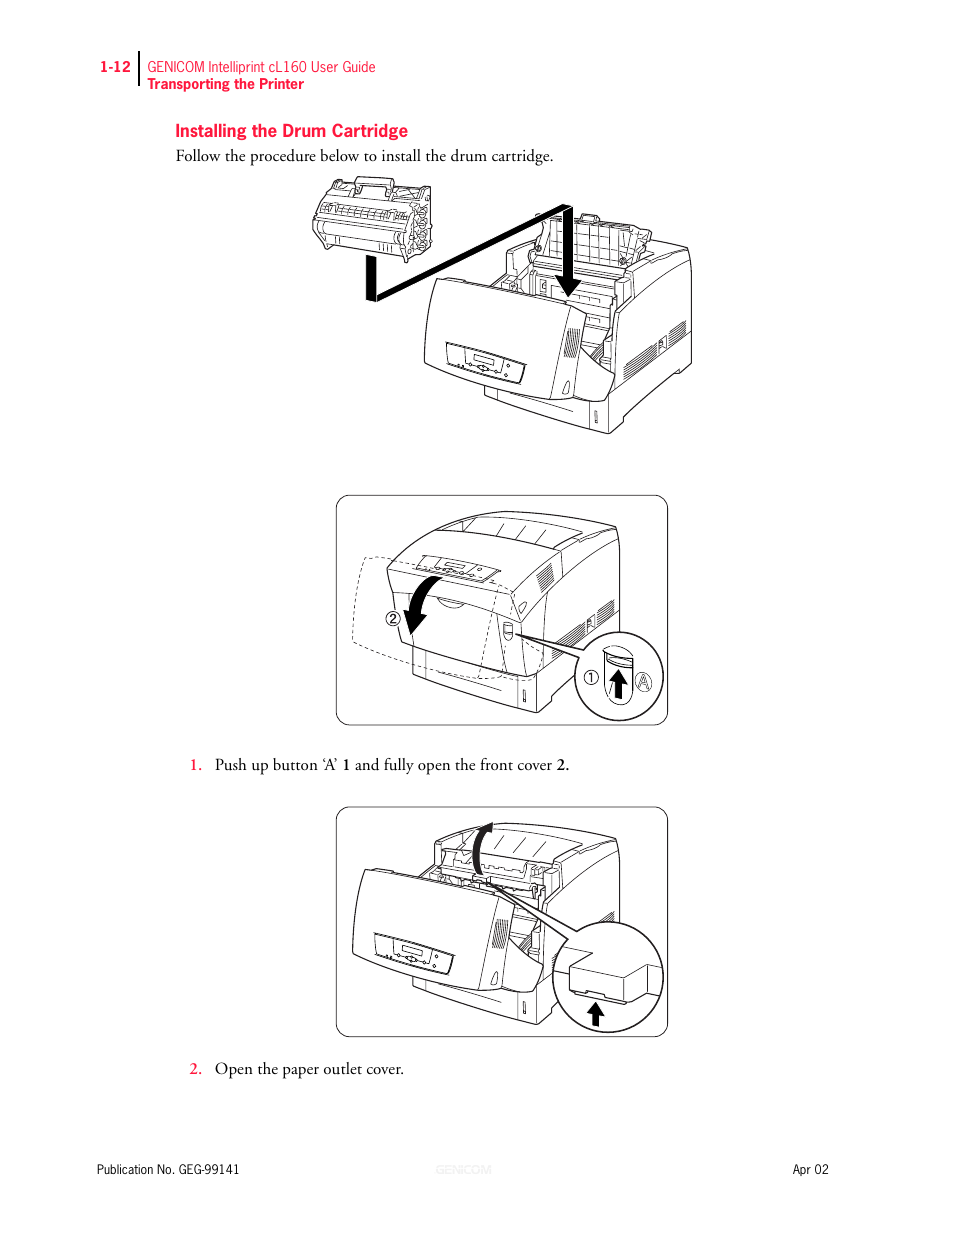 Installing the drum cartridge 1-12 | Genicom cL160 User Manual | Page 32 / 216